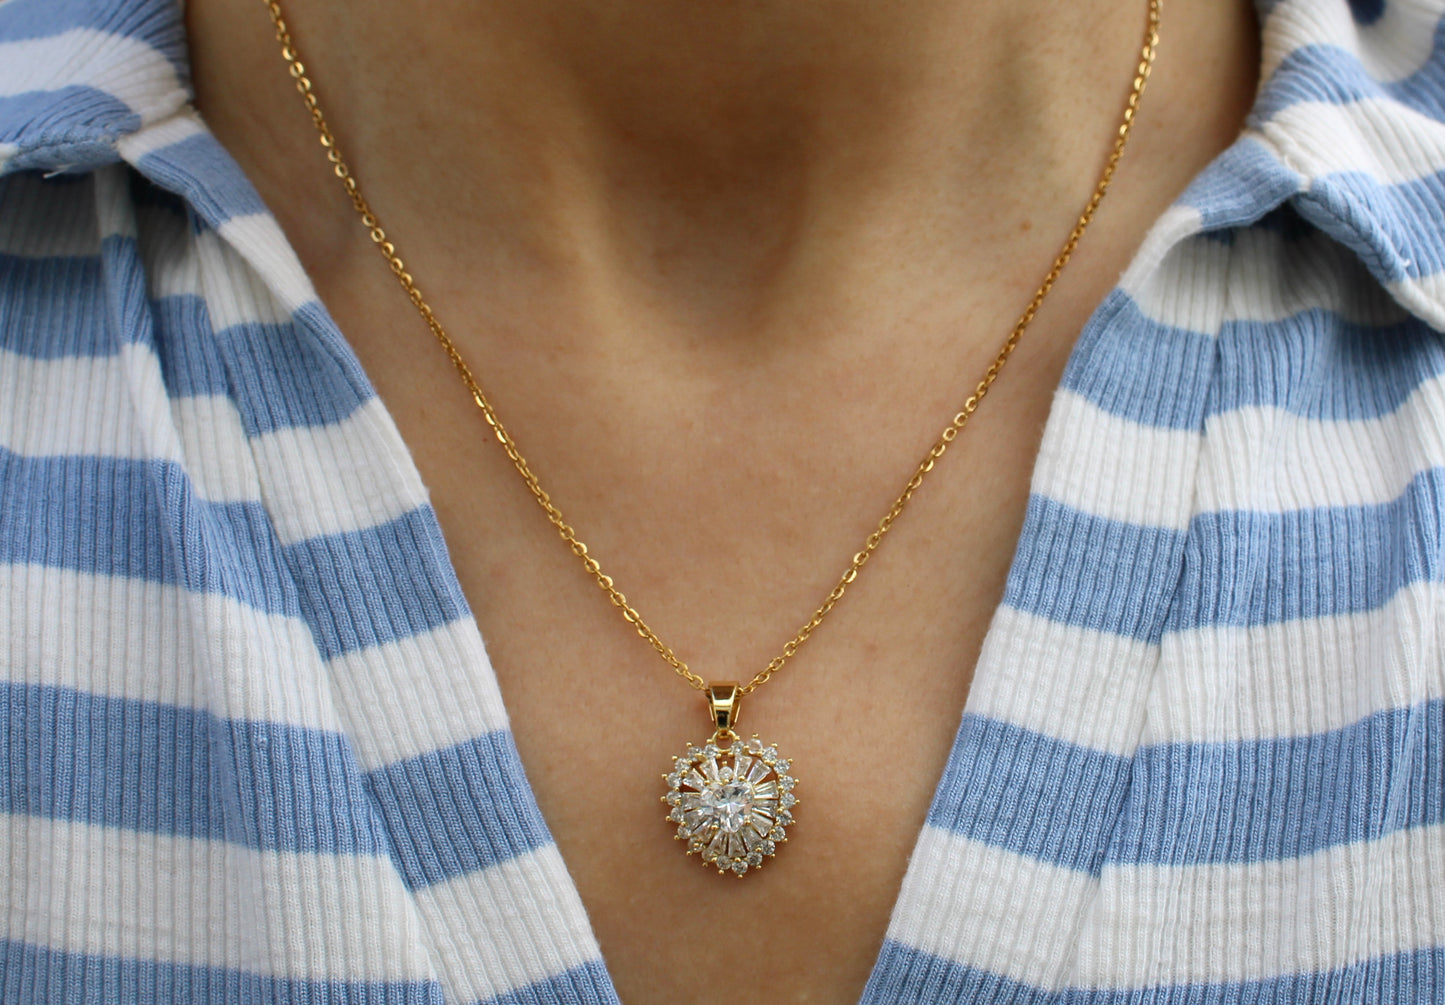 The sparkliest of all necklace N15